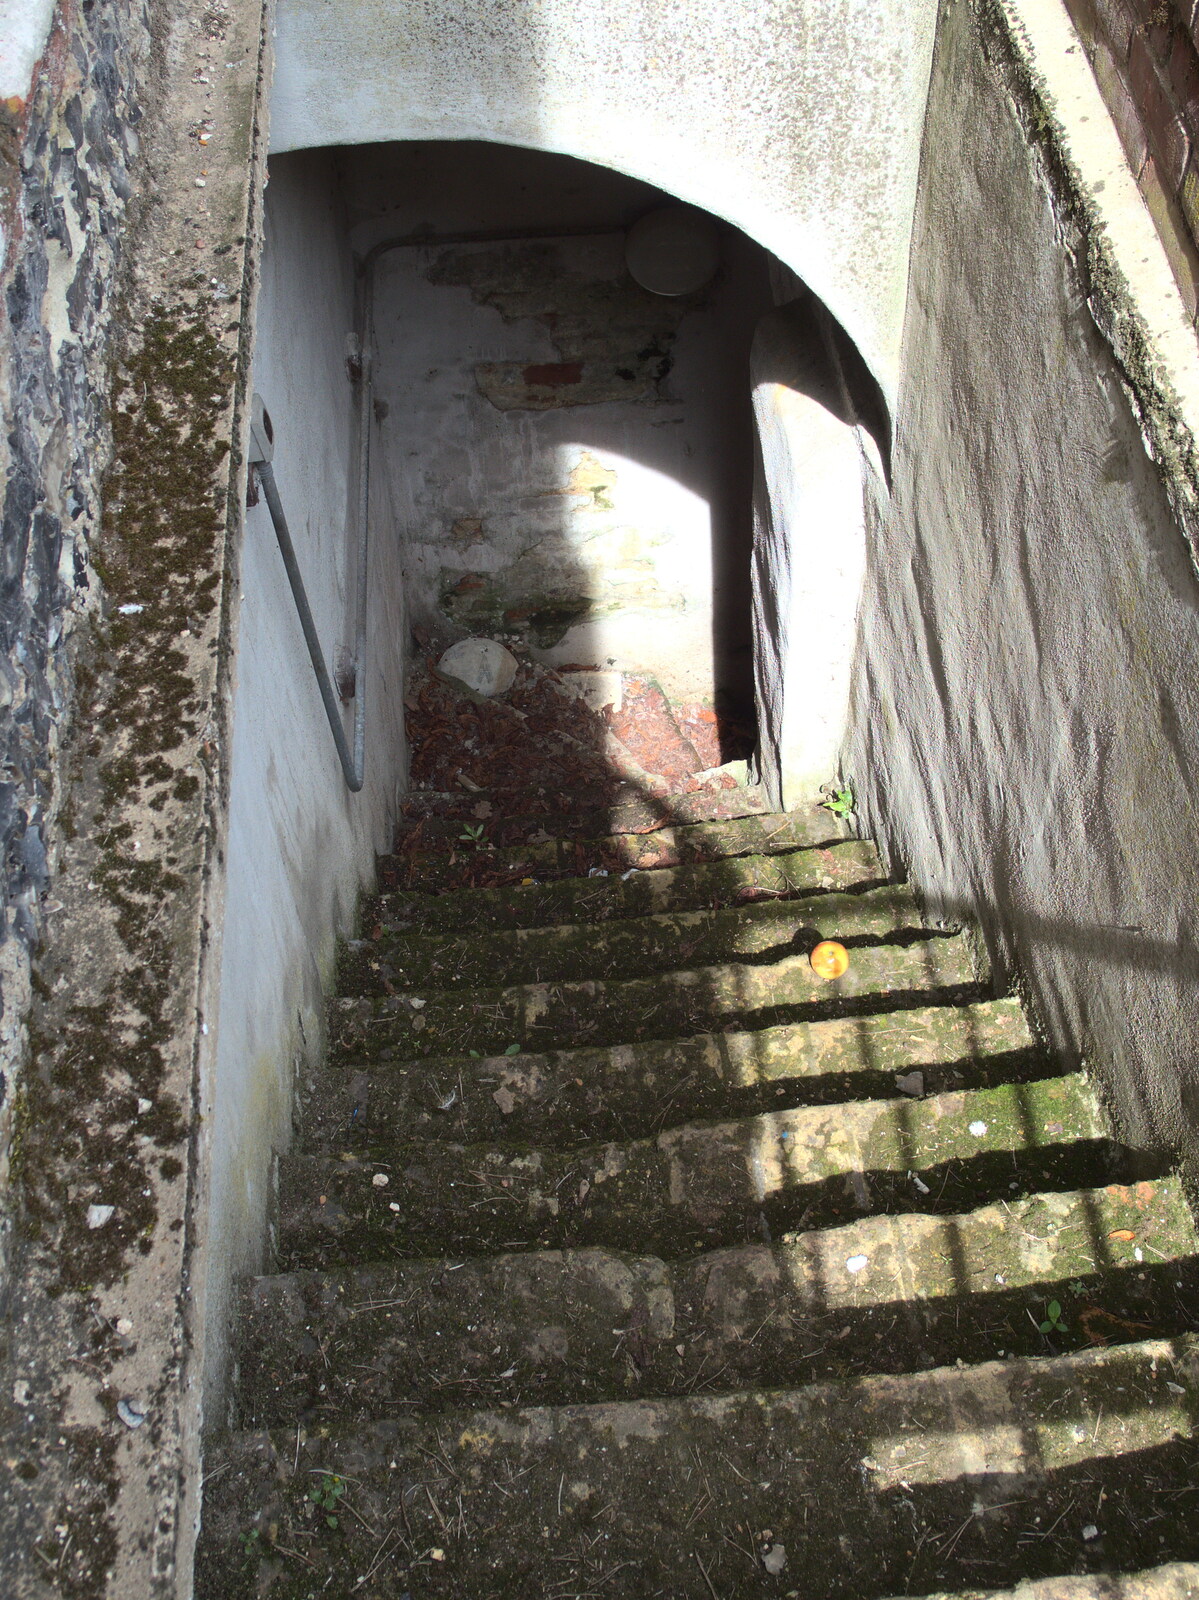 Steps down into the bowels of the church from The Oaksmere's First Year Anniversary, Brome, Suffolk - 23rd April 2015